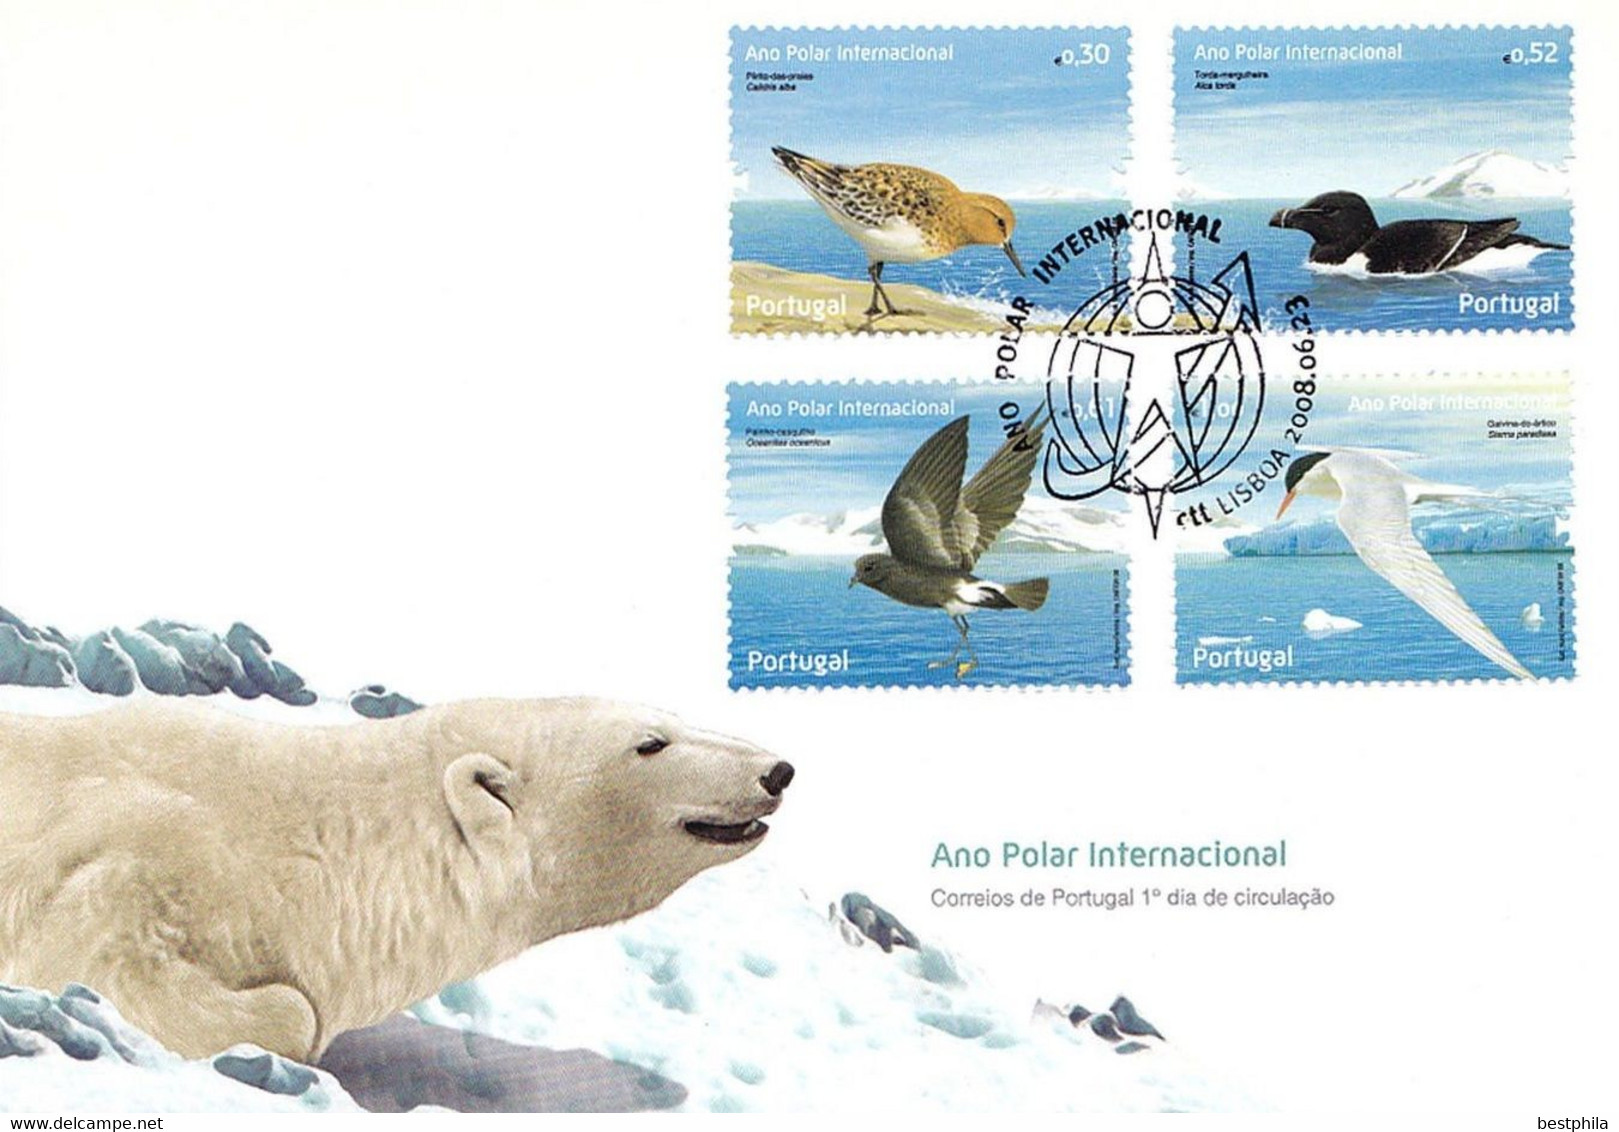 Portugal - 2008 - There Are 5 Different Of FDC In The Special Book - (See 7 Scan) - It Looks So Clean - Libro Del Año